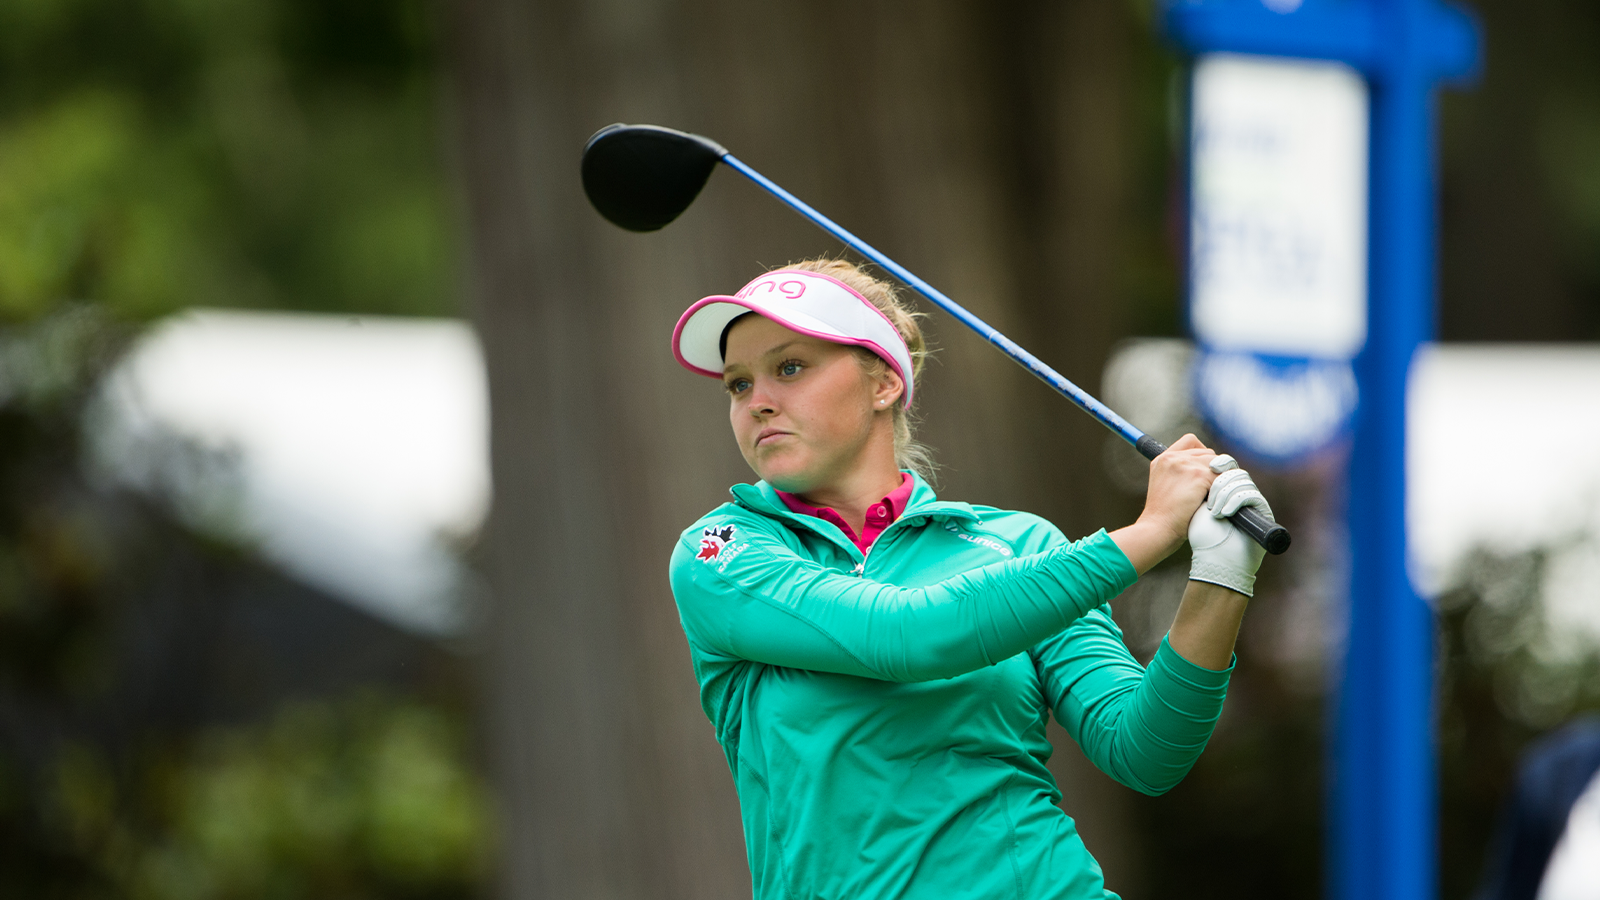 Brooke Henderson of Canada hits her tee shot on the seventh hole during the final round of the 2016 KPMG Women’s PGA Championship at the Sahalee Country Club on June 12, 2016 in Sammamish, Washington. (Photo by Montana Pritchard/The PGA of America)